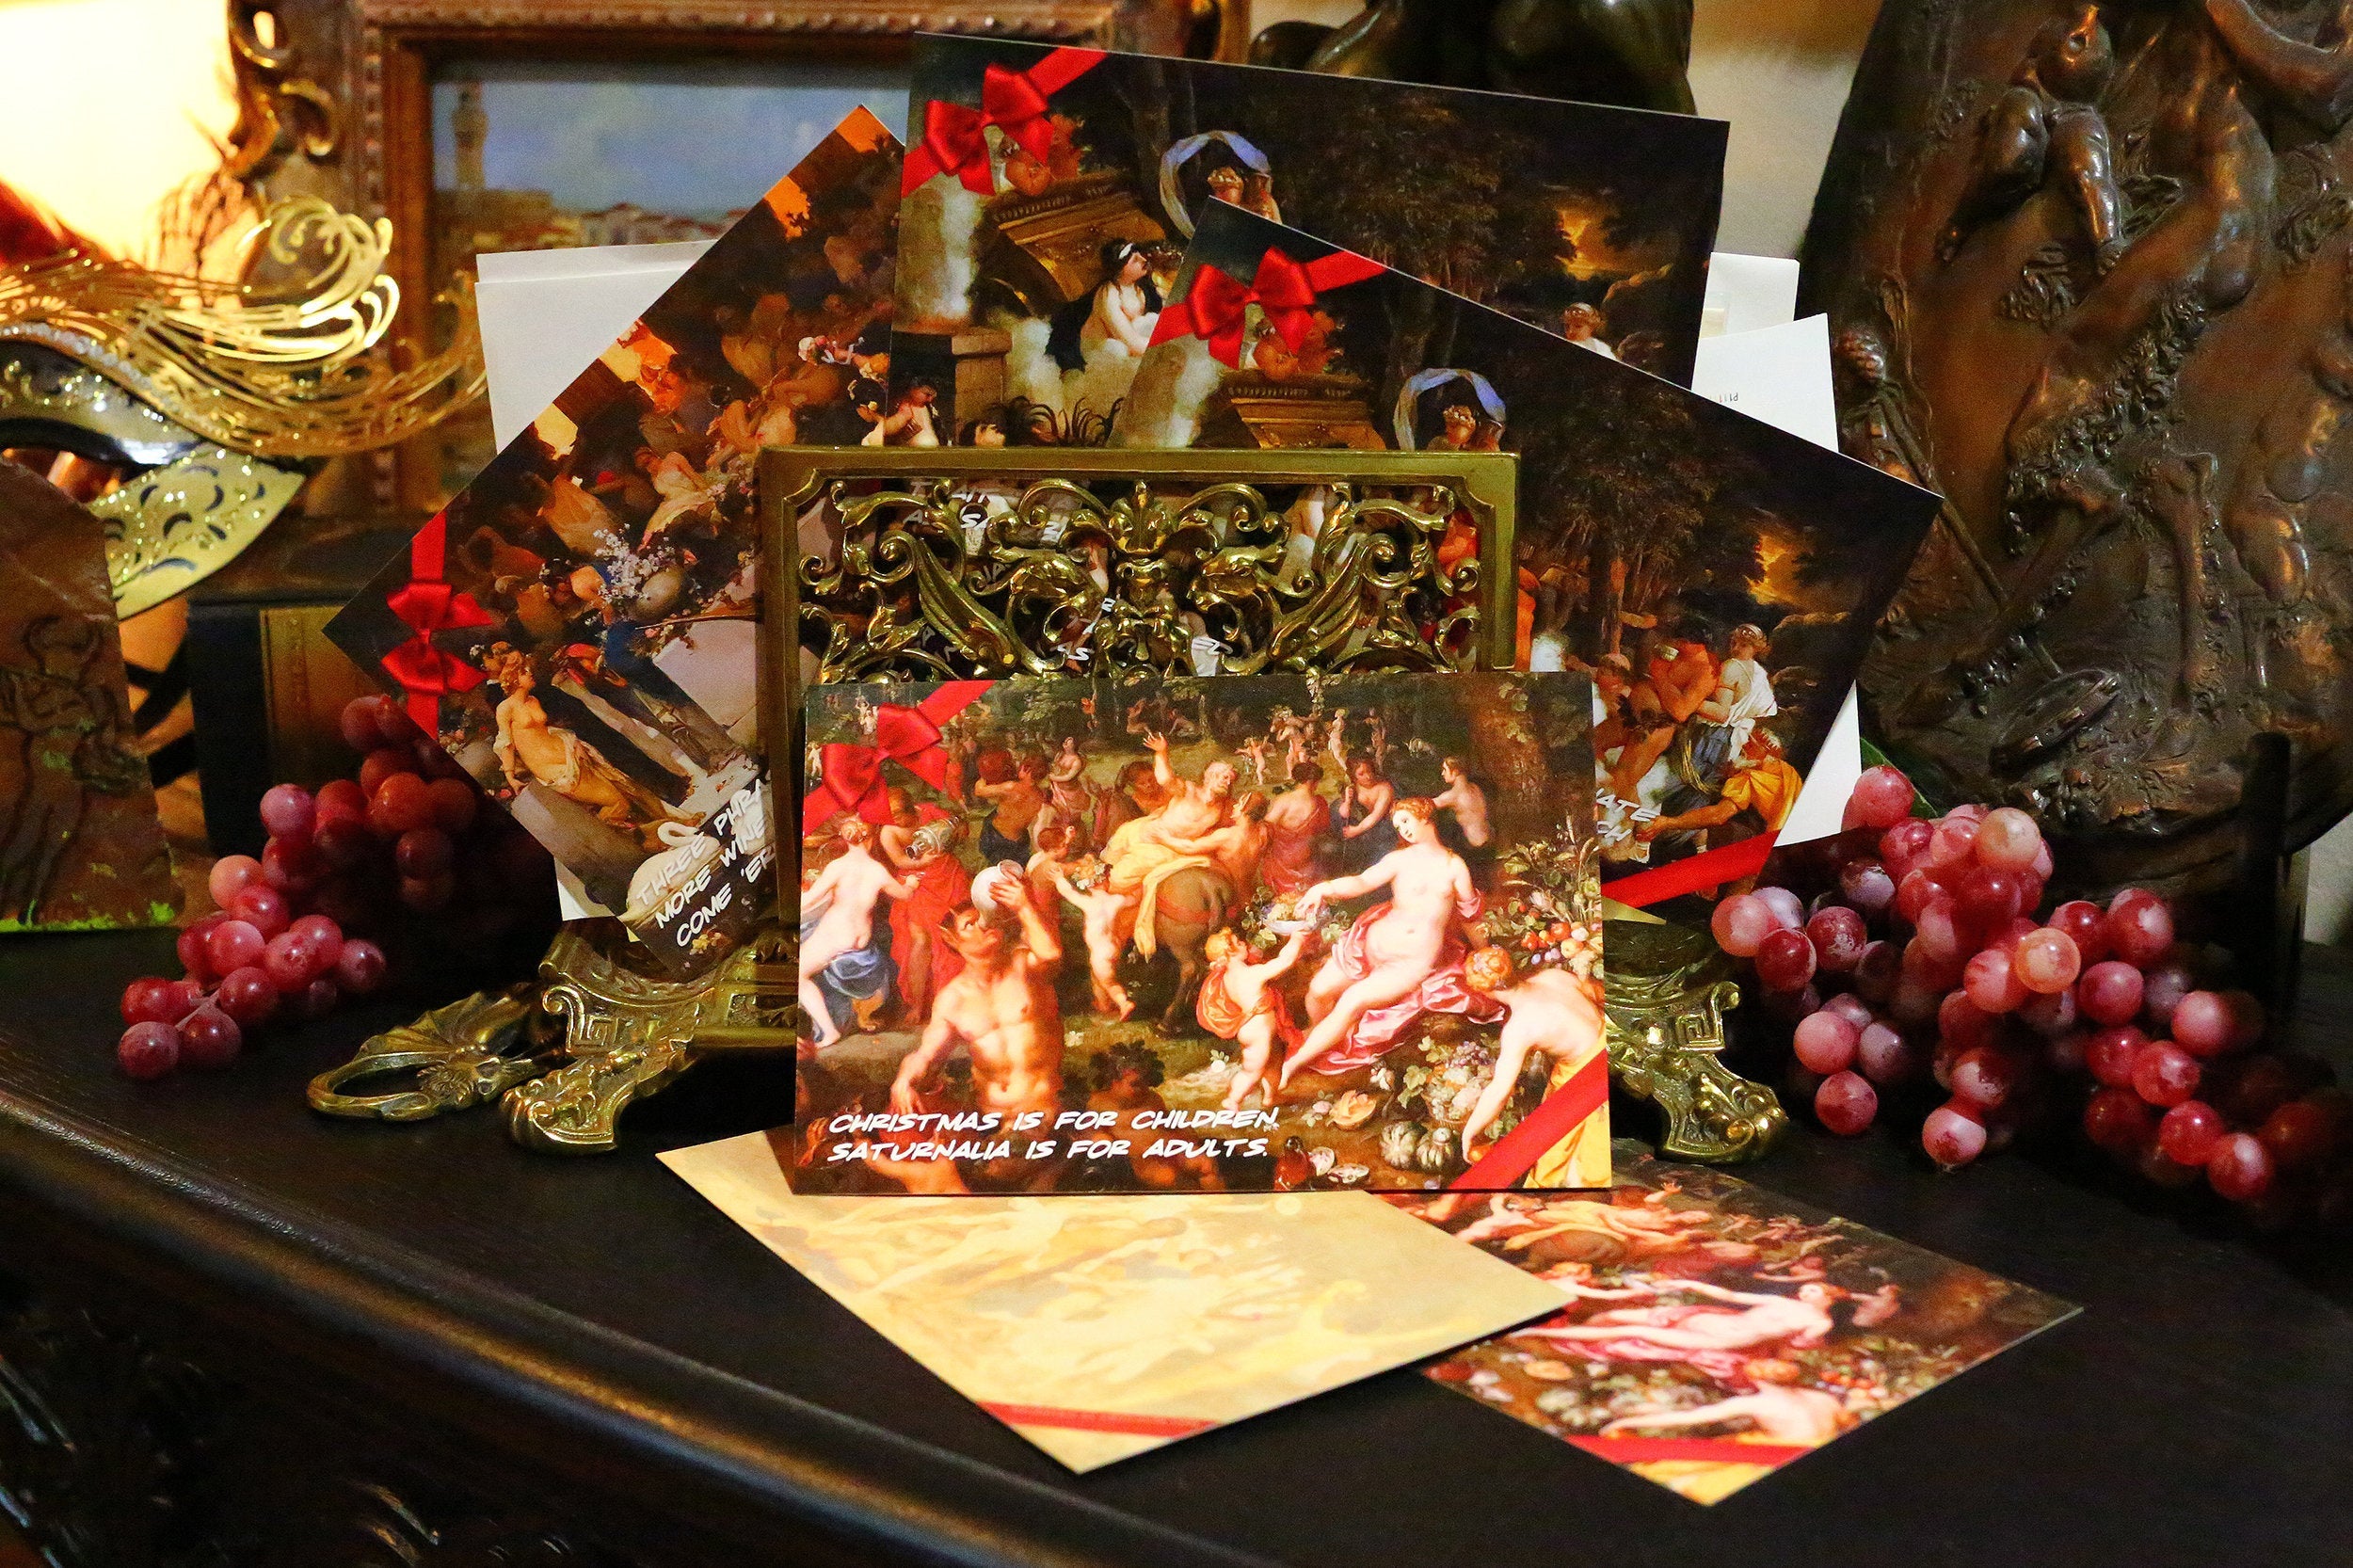 Saturnalia Bacchanalia Pagan Holiday Postcard/Greeting Card Set, Exclusively Designed, 6 Designs, 12 Cards